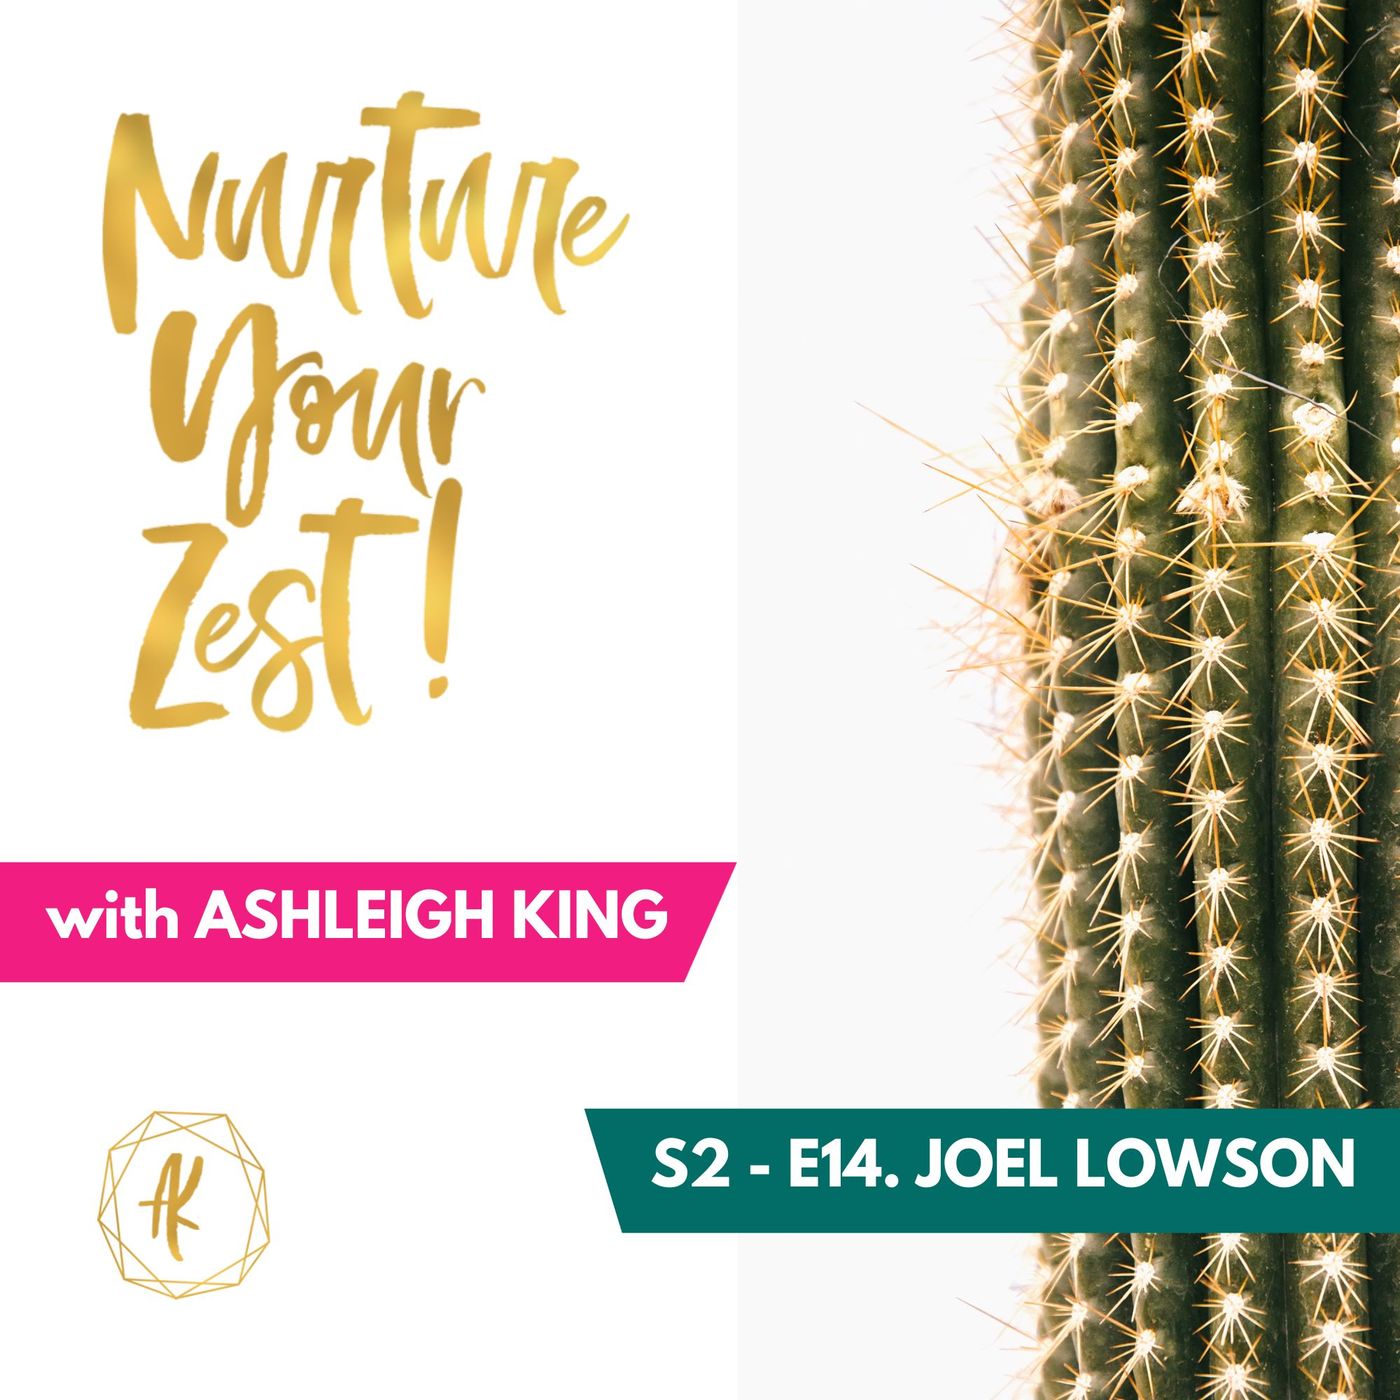 #NurtureYourZest S2-E14 Joel Lowson chats to Ashleigh King about Ageism and His Creative Process